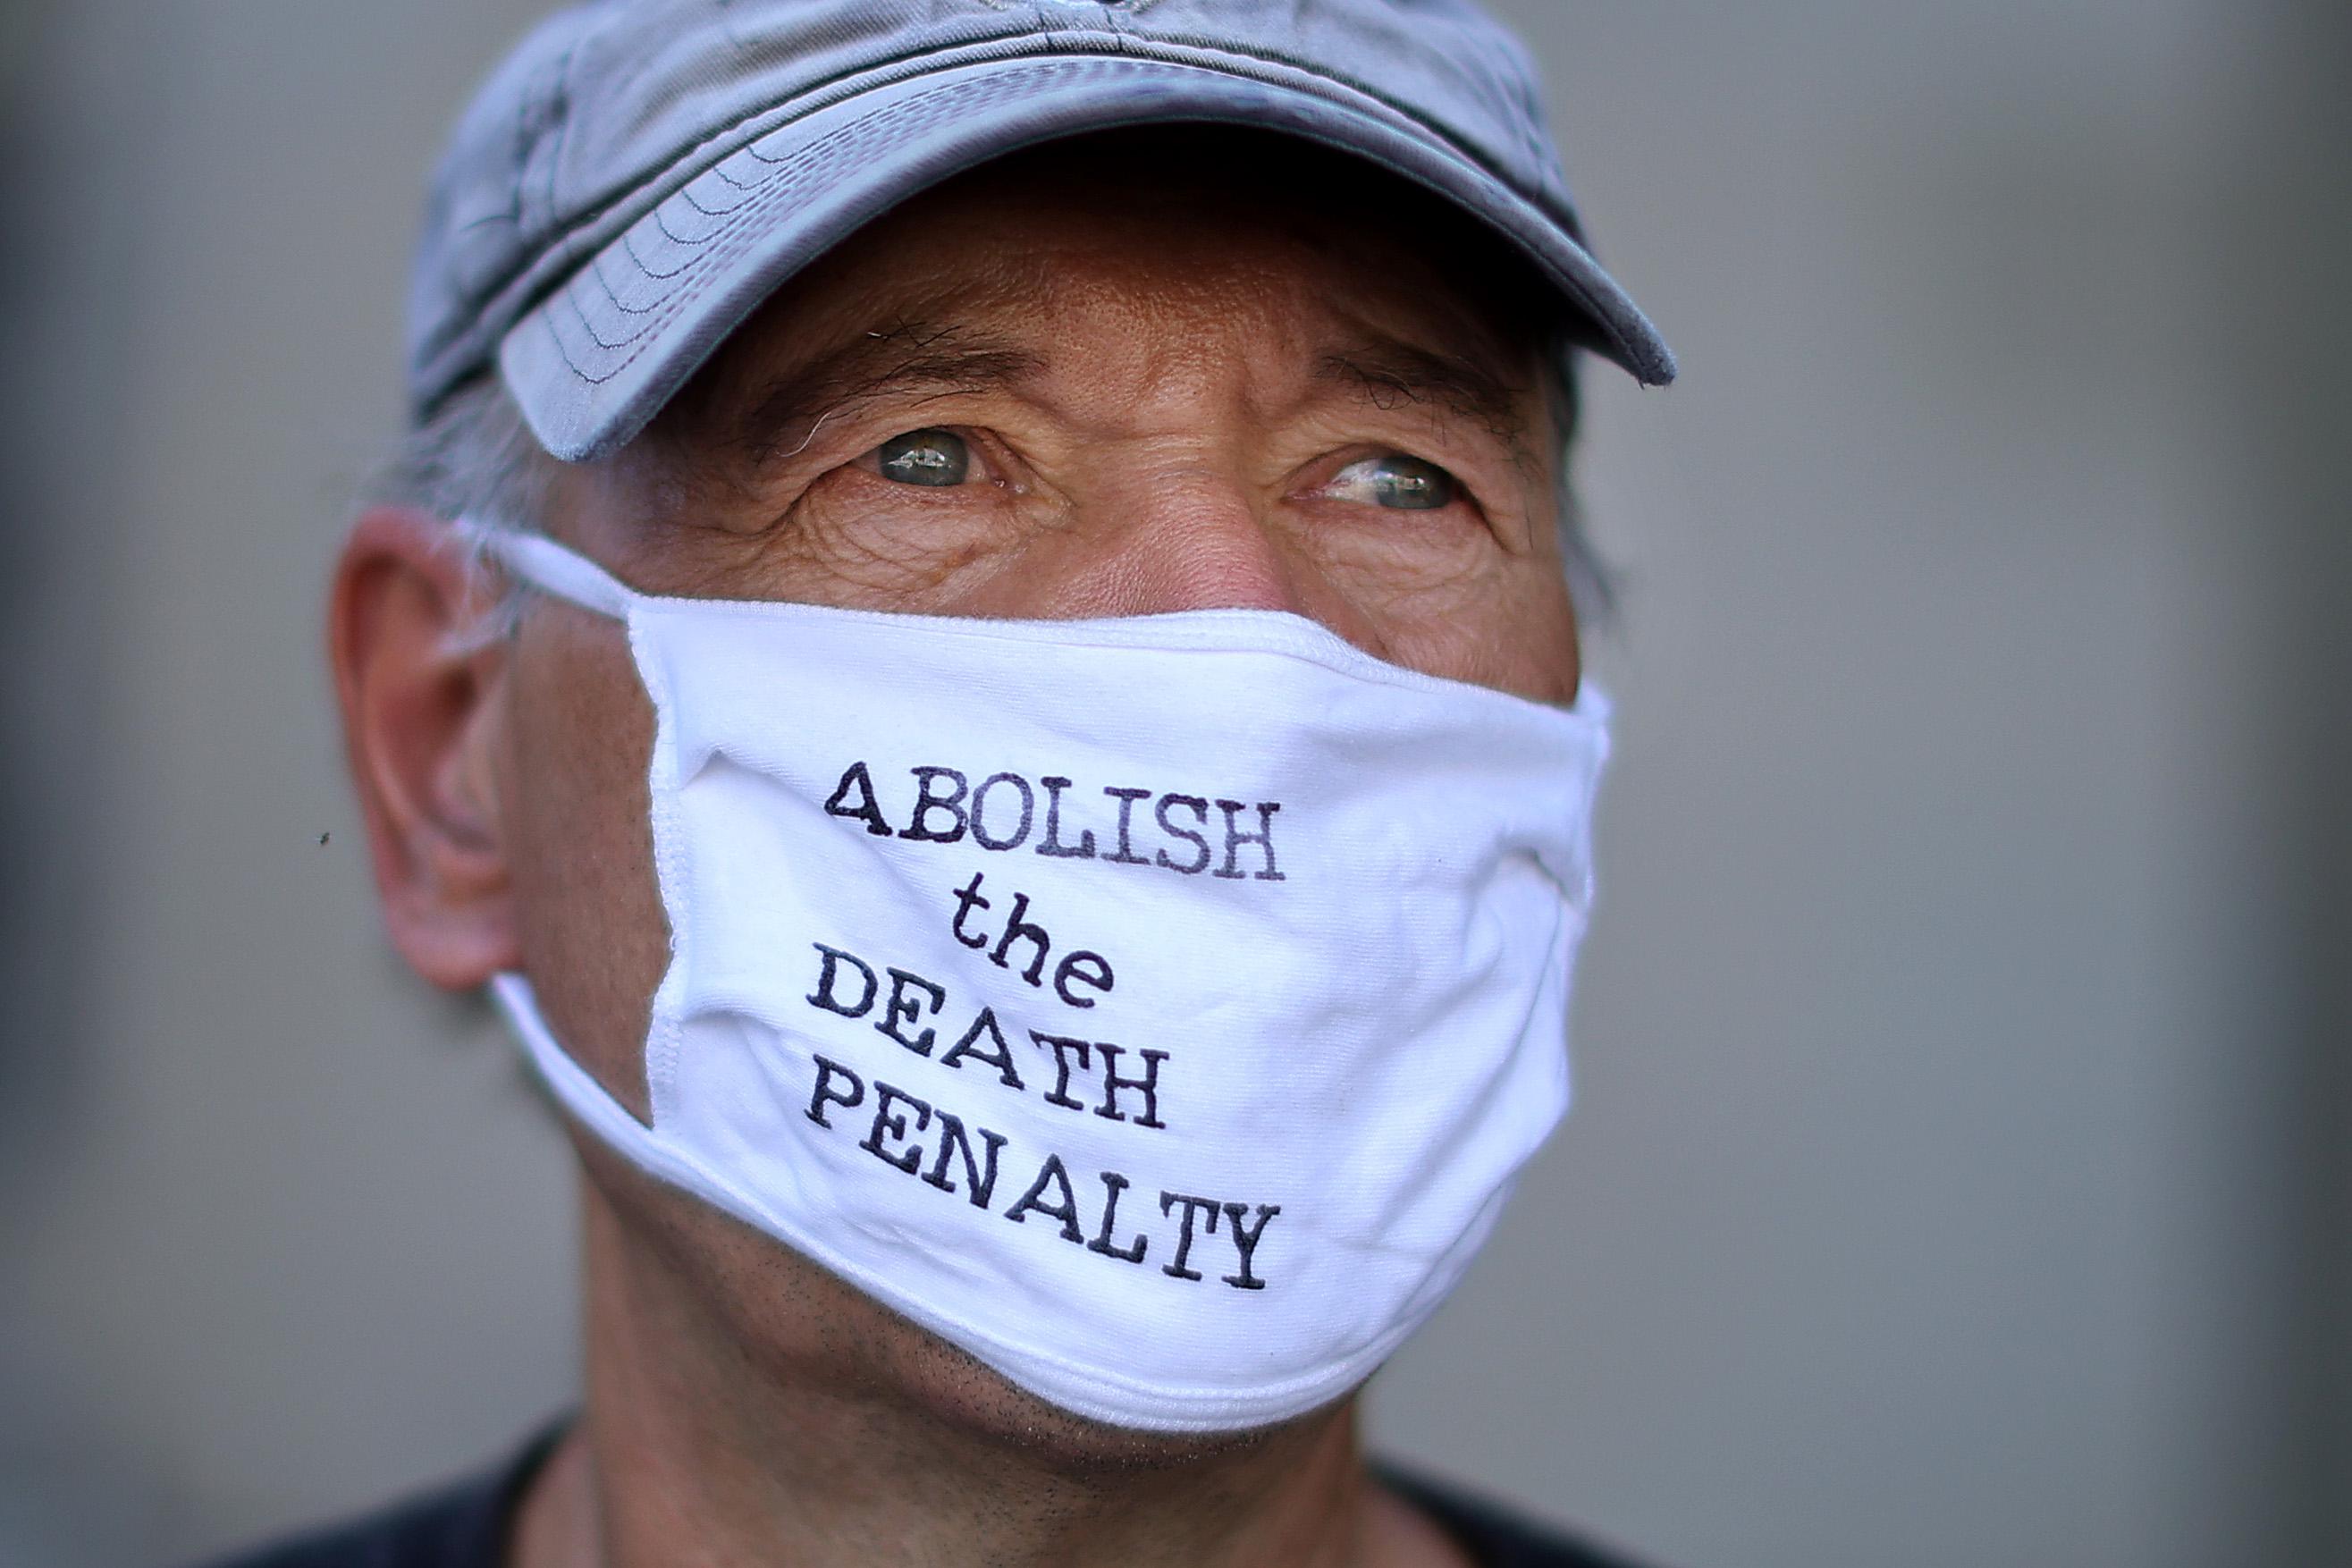 Laffin stares deeply wearing a mask that says "Abolish the Death Penalty."